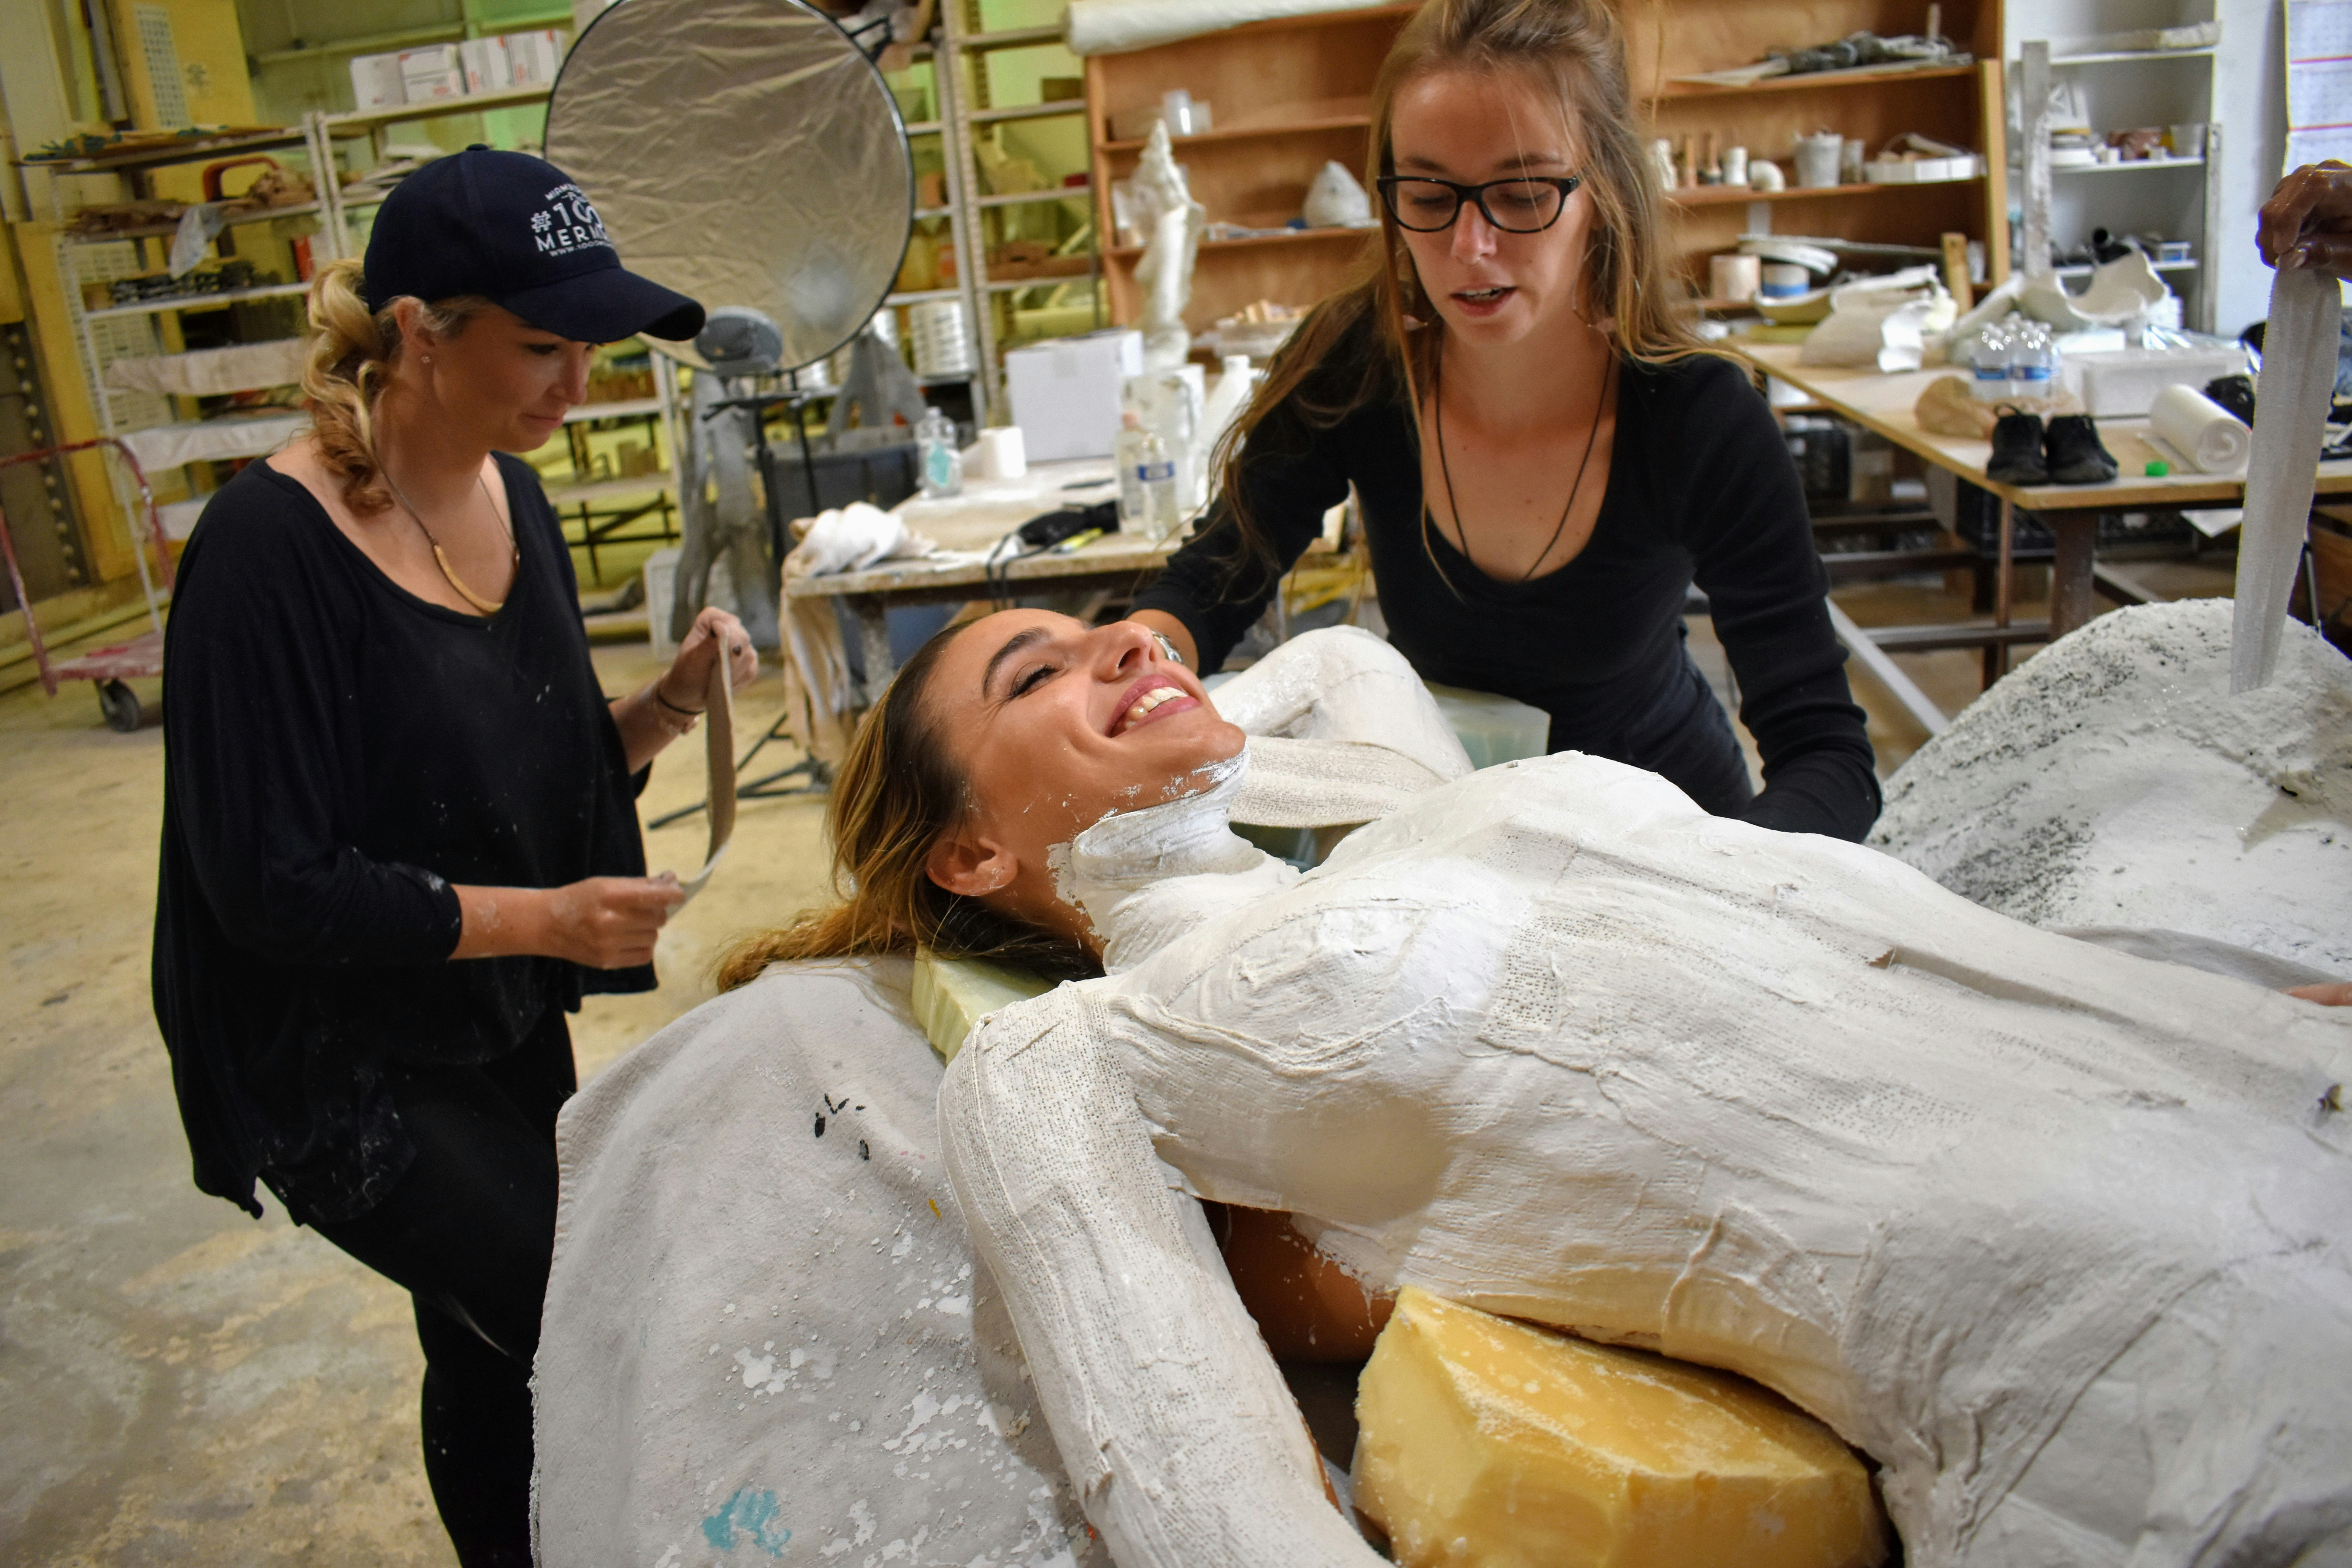 A woman covered in plaster smiles as another pair of woman place more plaster sections on her body. In the background is a collection of shelves and artist equipment scattered about on tables. 